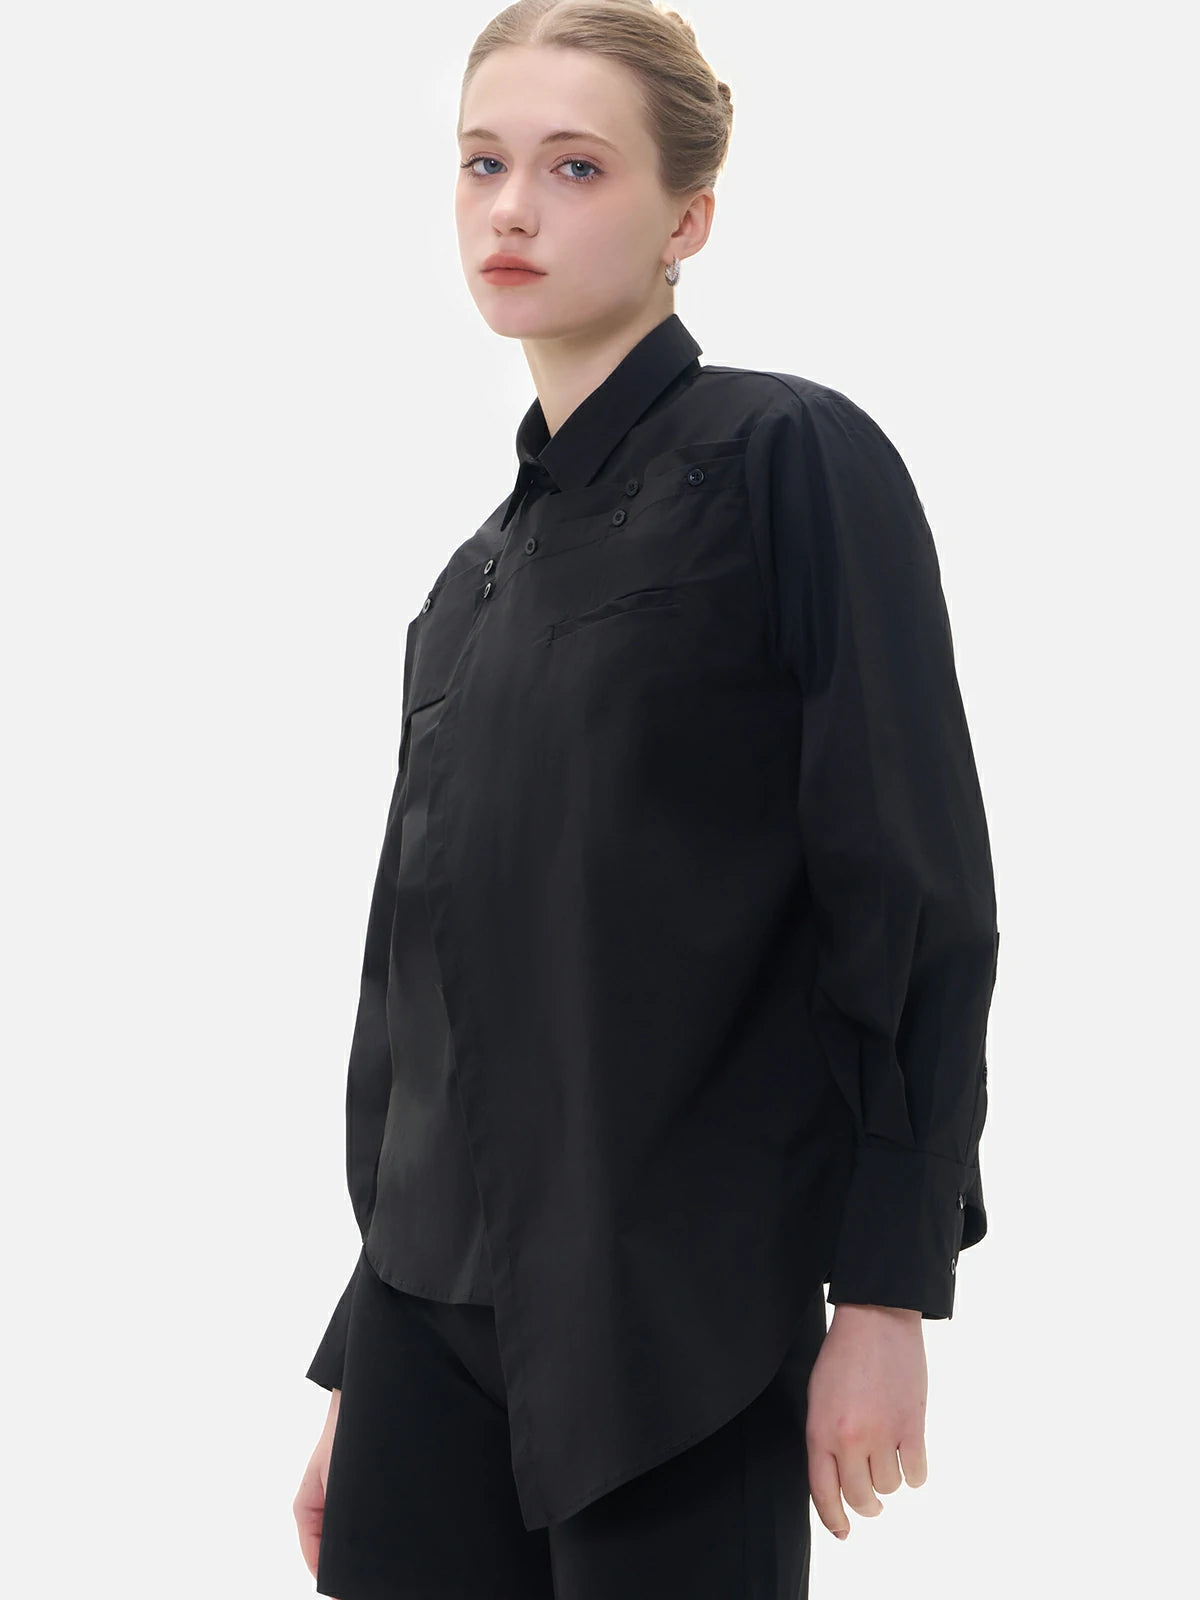 Versatile black shirt featuring a sophisticated chest panel, adding a touch of fashion-forward detailing for a polished look.